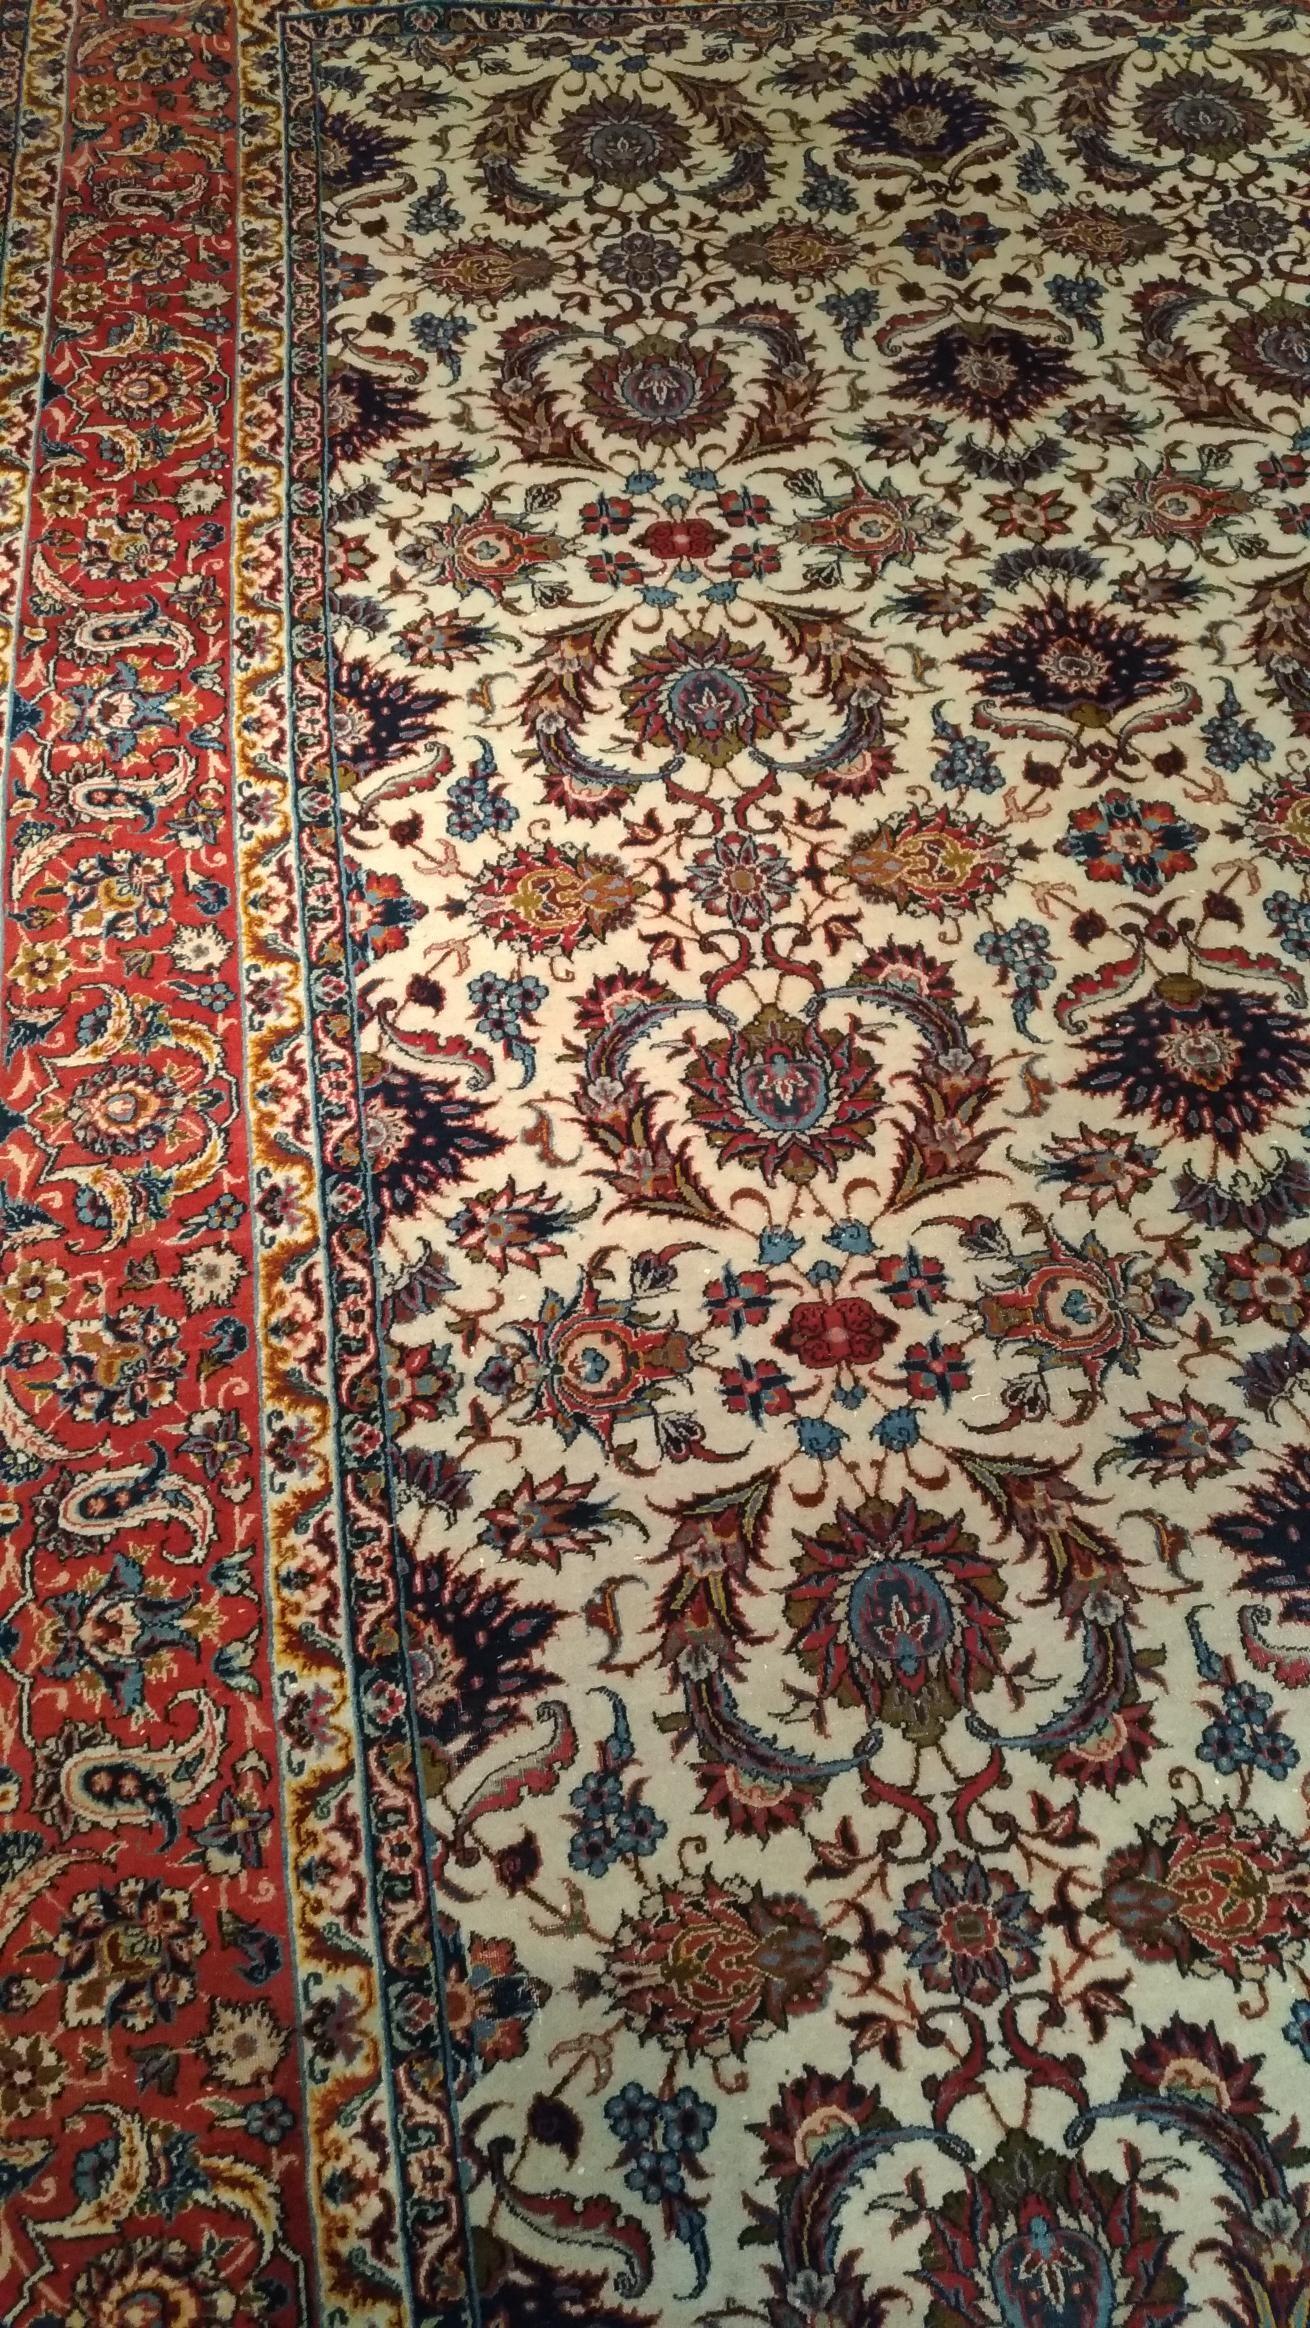 1018 - Very fine carpet with a beautiful floral pattern, beautiful colors white, blue and red, entirely and finely hand-knotted with wool pile on the cotton thread.